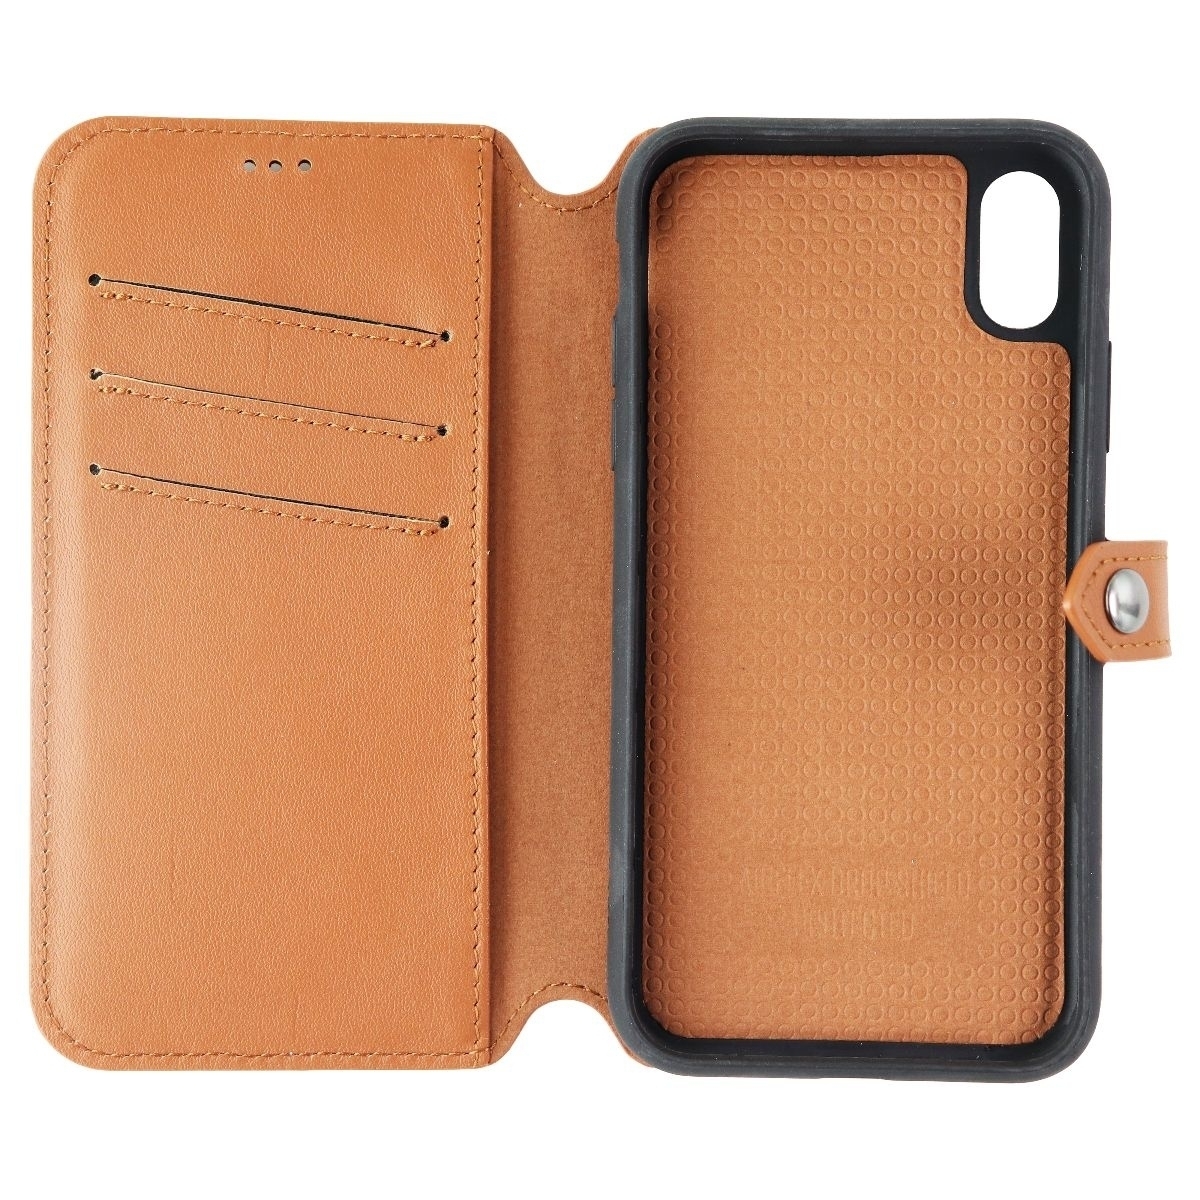 ERCKO 2-in-1 Magnet Wallet Leather Case For IPhone XR - Brown/Black